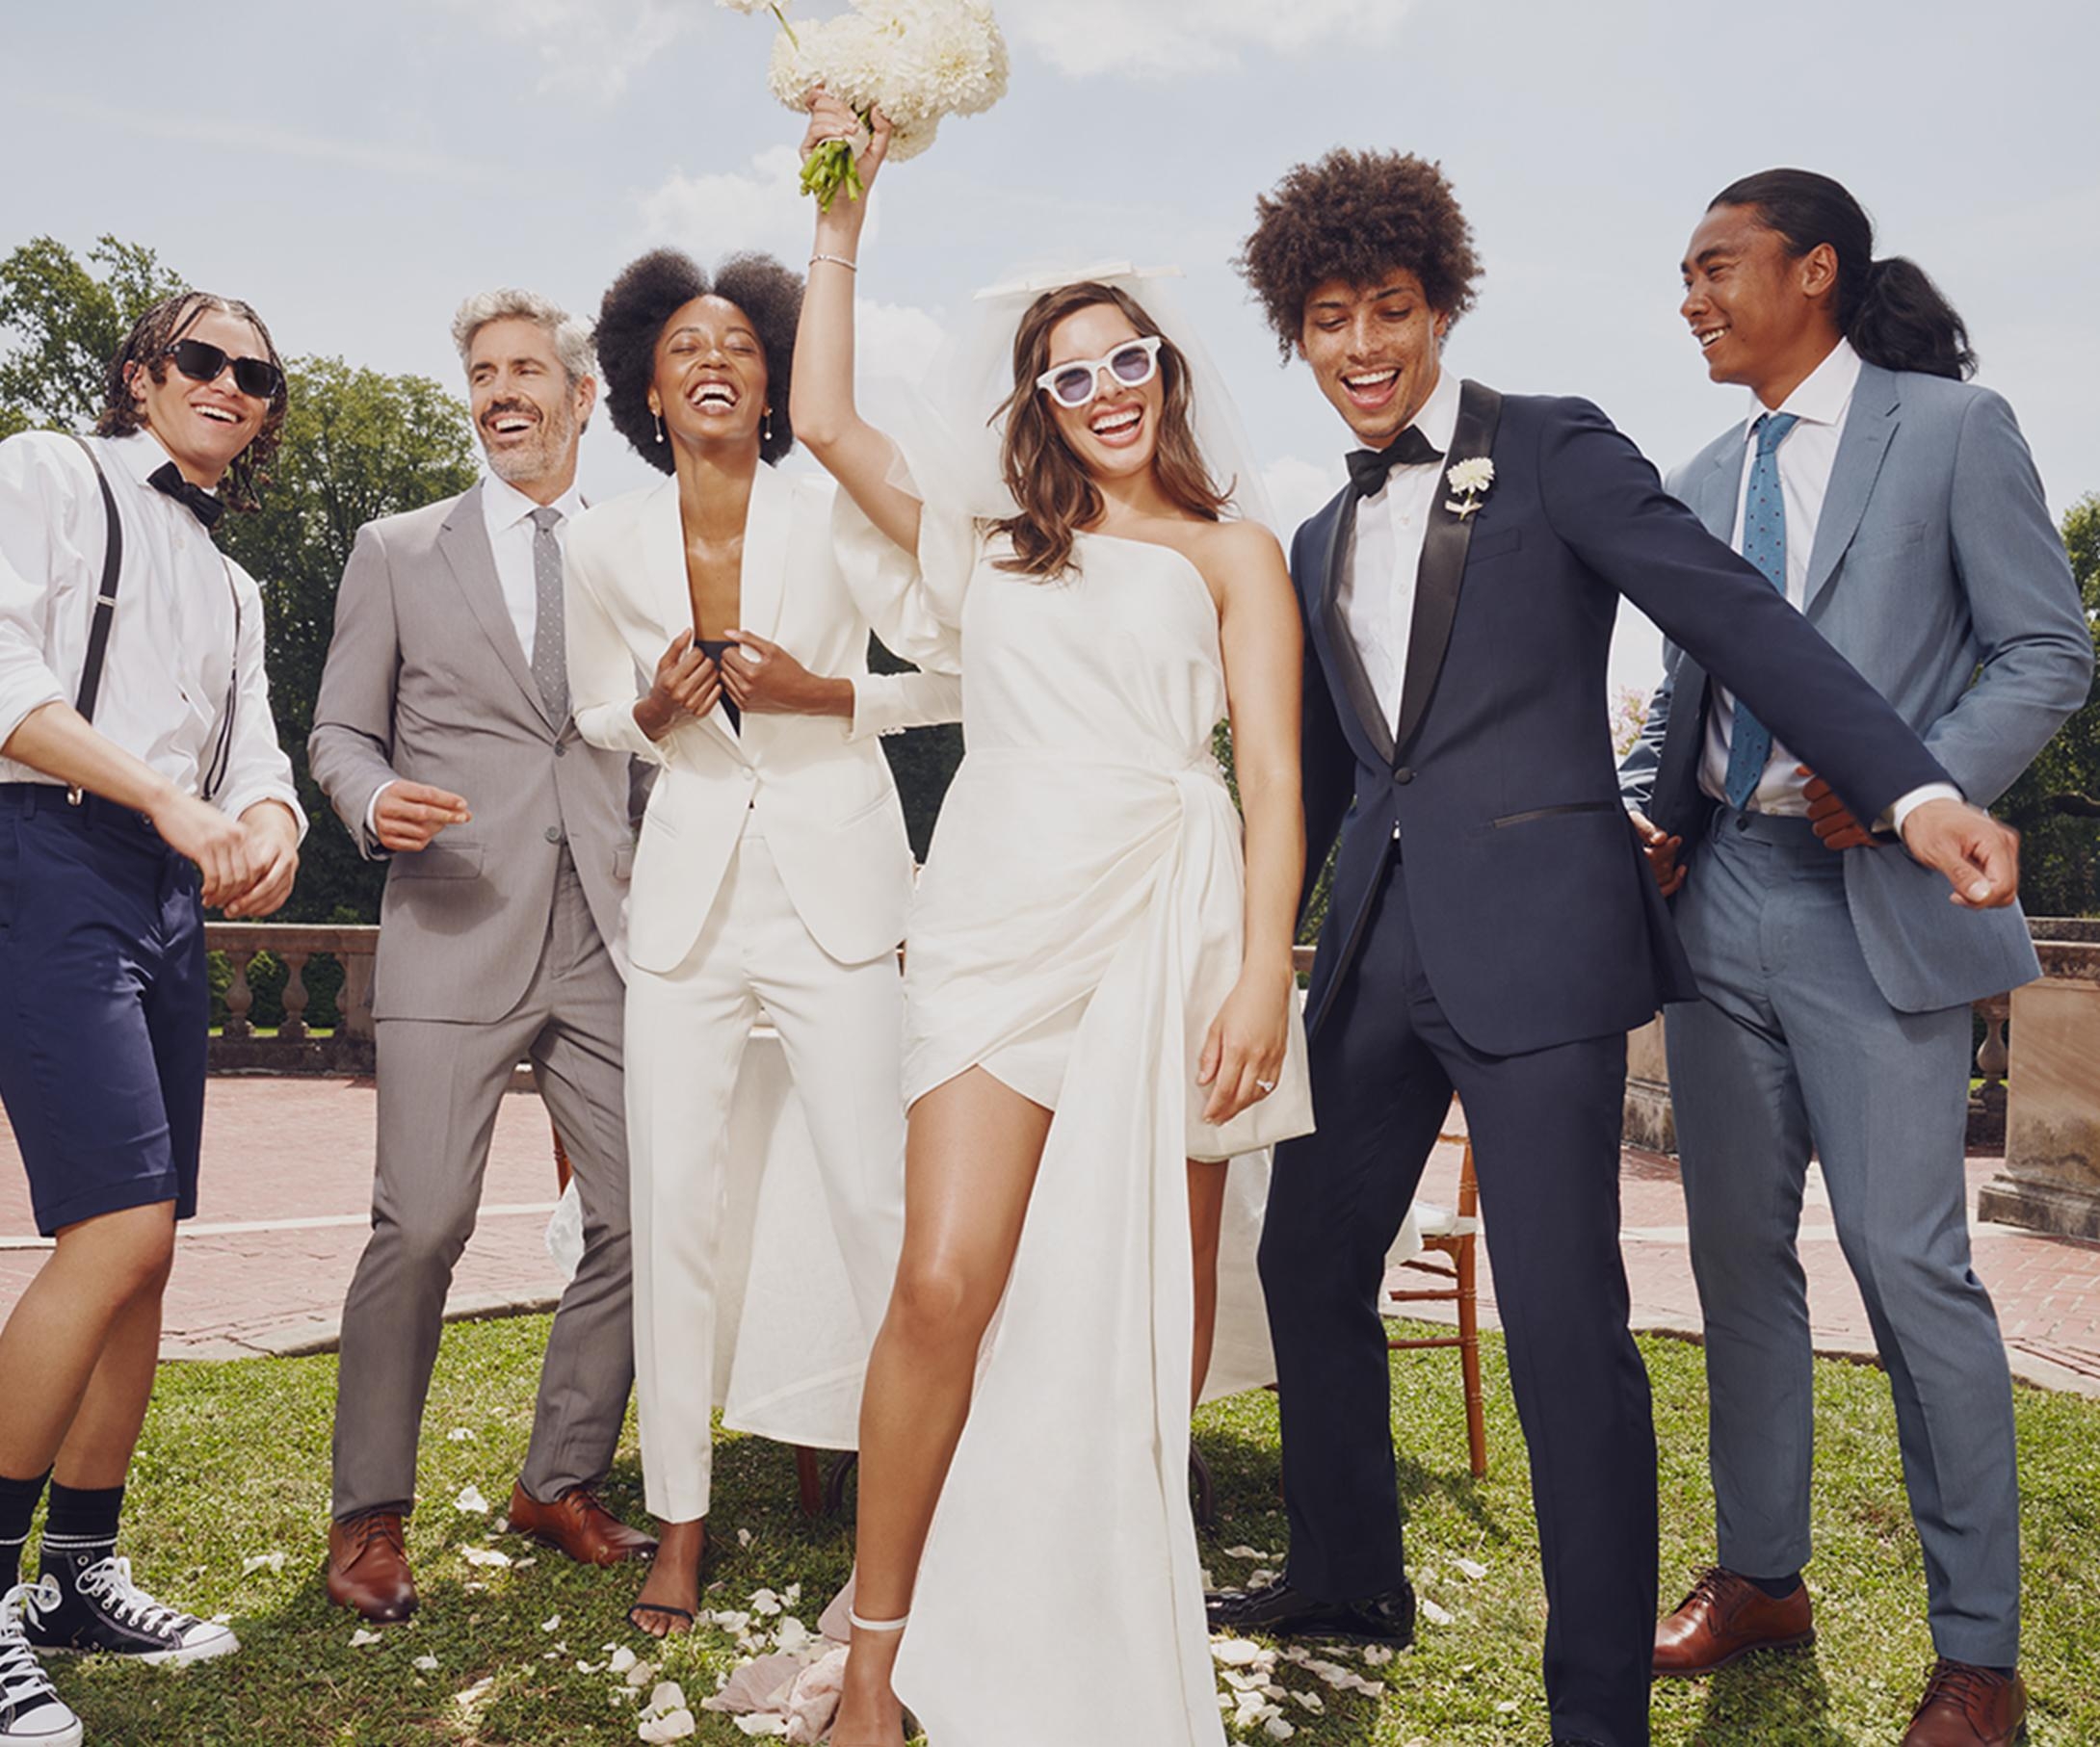 Mixed gender bridal party in black tie optional attire of stylish grey & blue wedding suits & tuxedos.